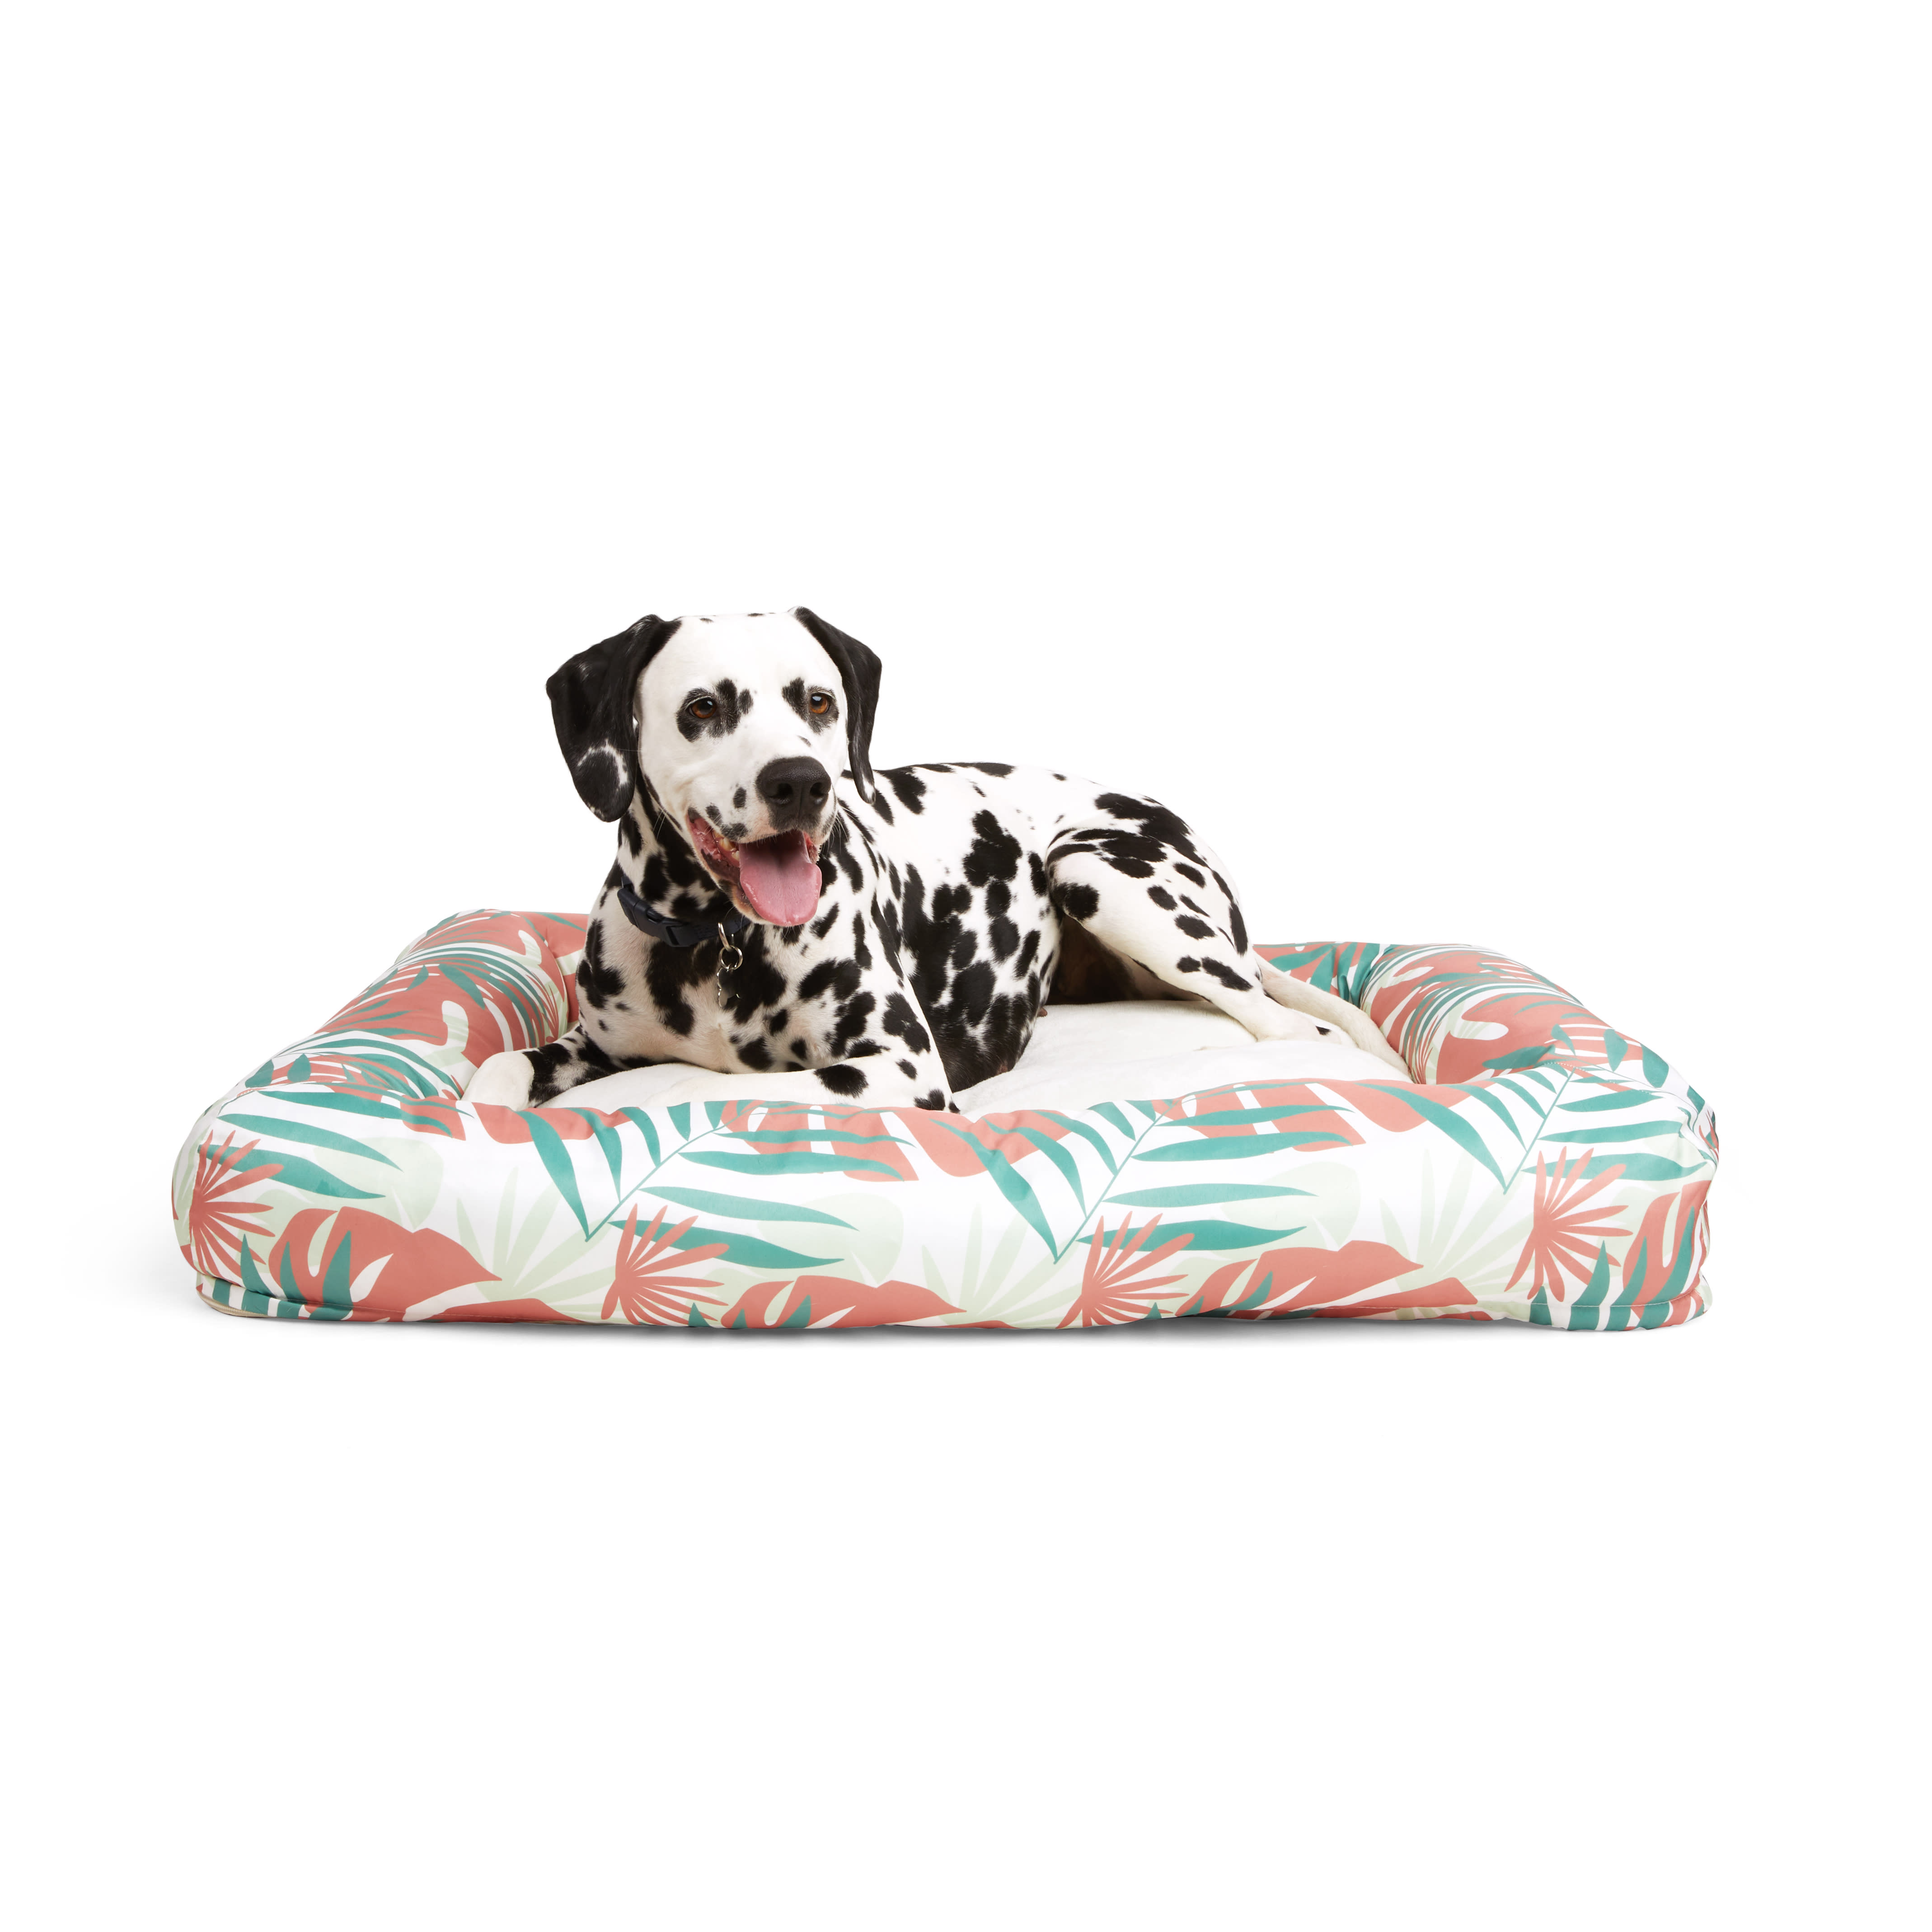 IFOYO Puppy Dog Bed, Plush Bedding for Anxious Dogs, Puppy Calming